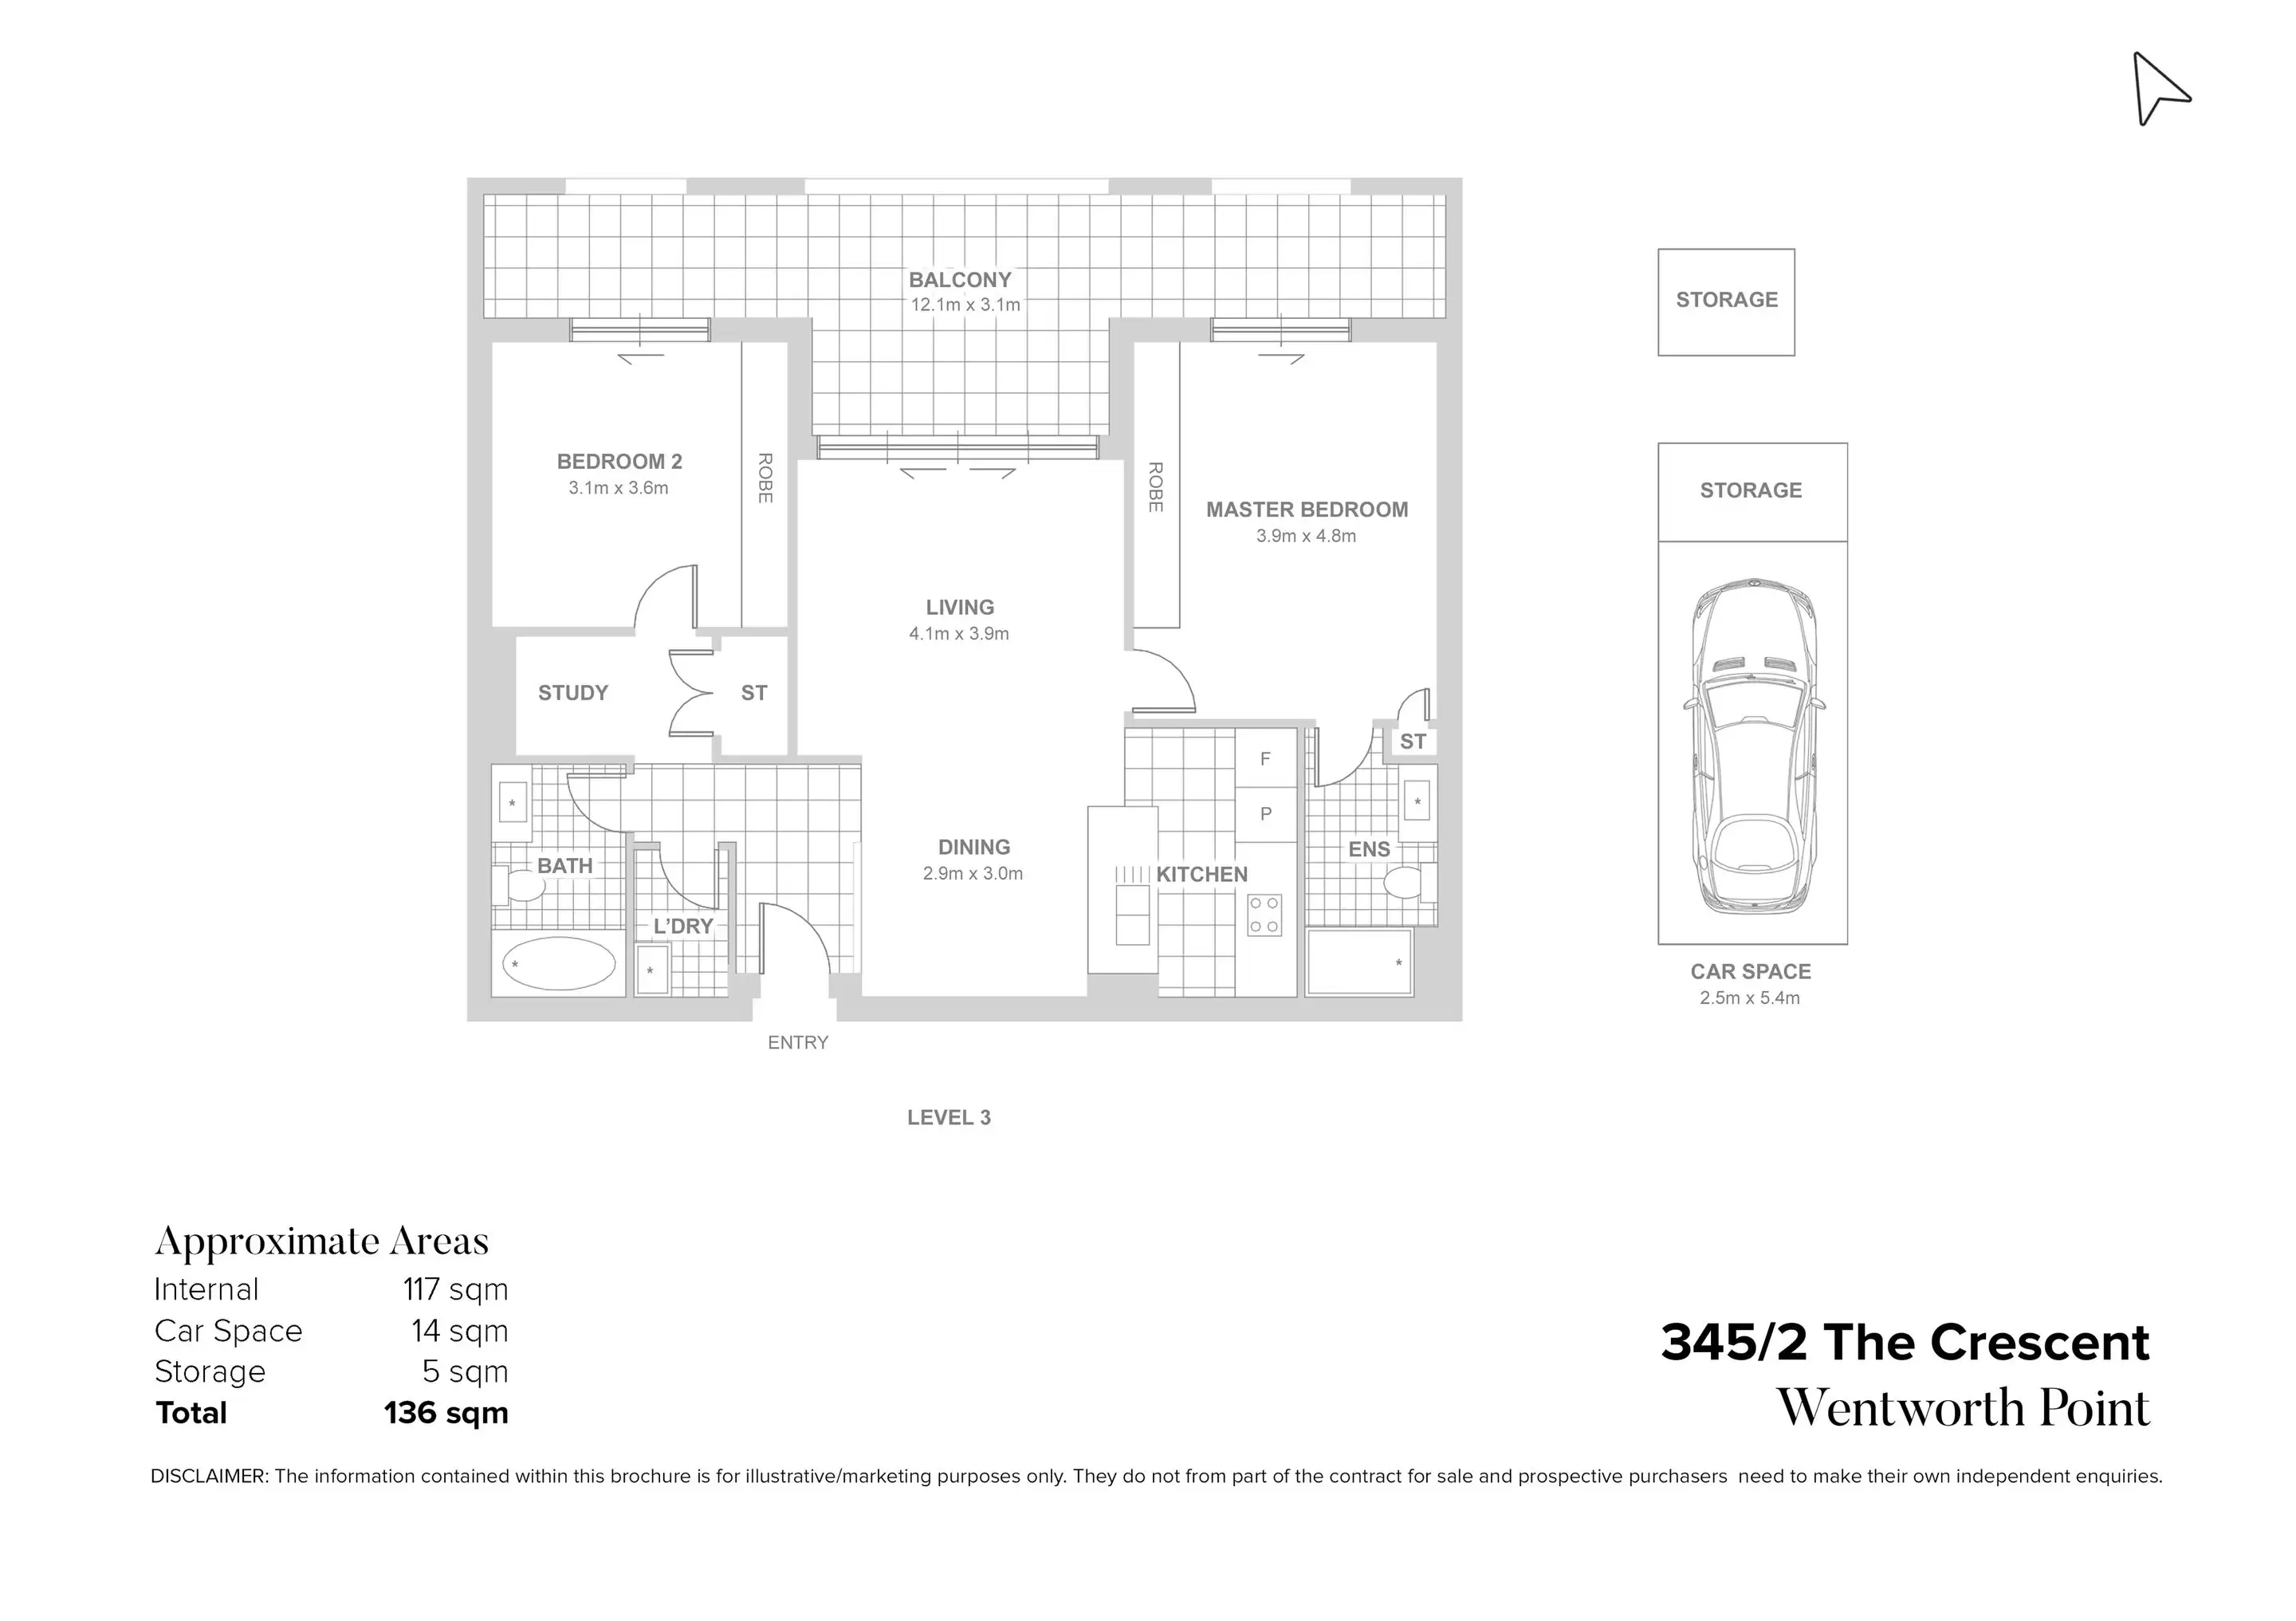 345/2 The Crescent, Wentworth Point Sold by Chidiac Realty - floorplan